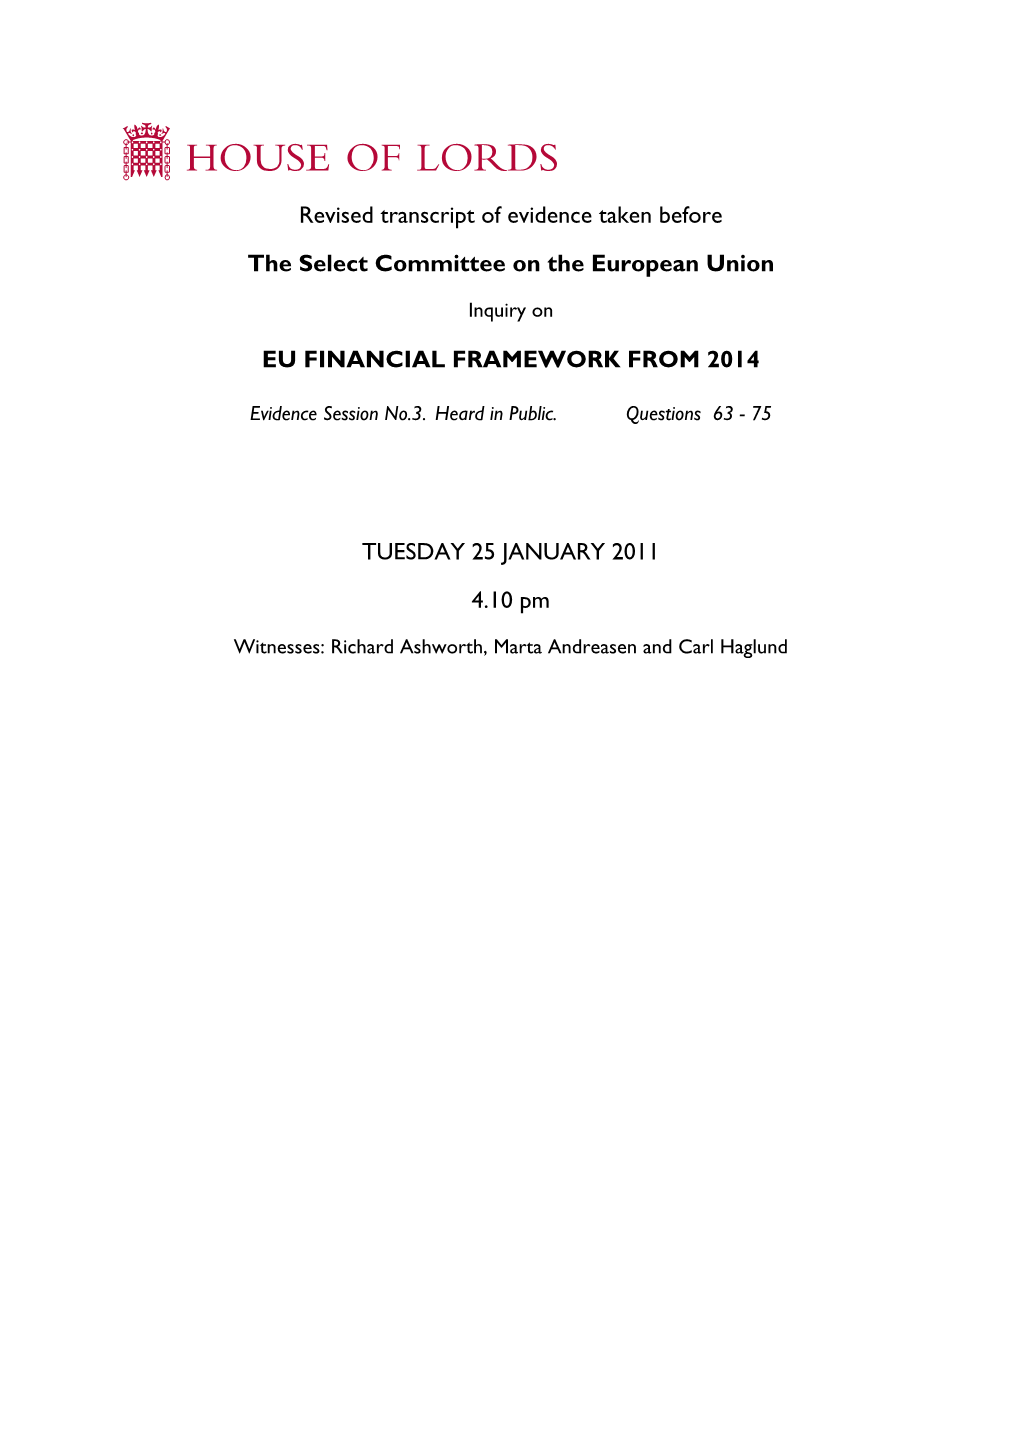 Revised Transcript of Evidence Taken Before the Select Committee on The